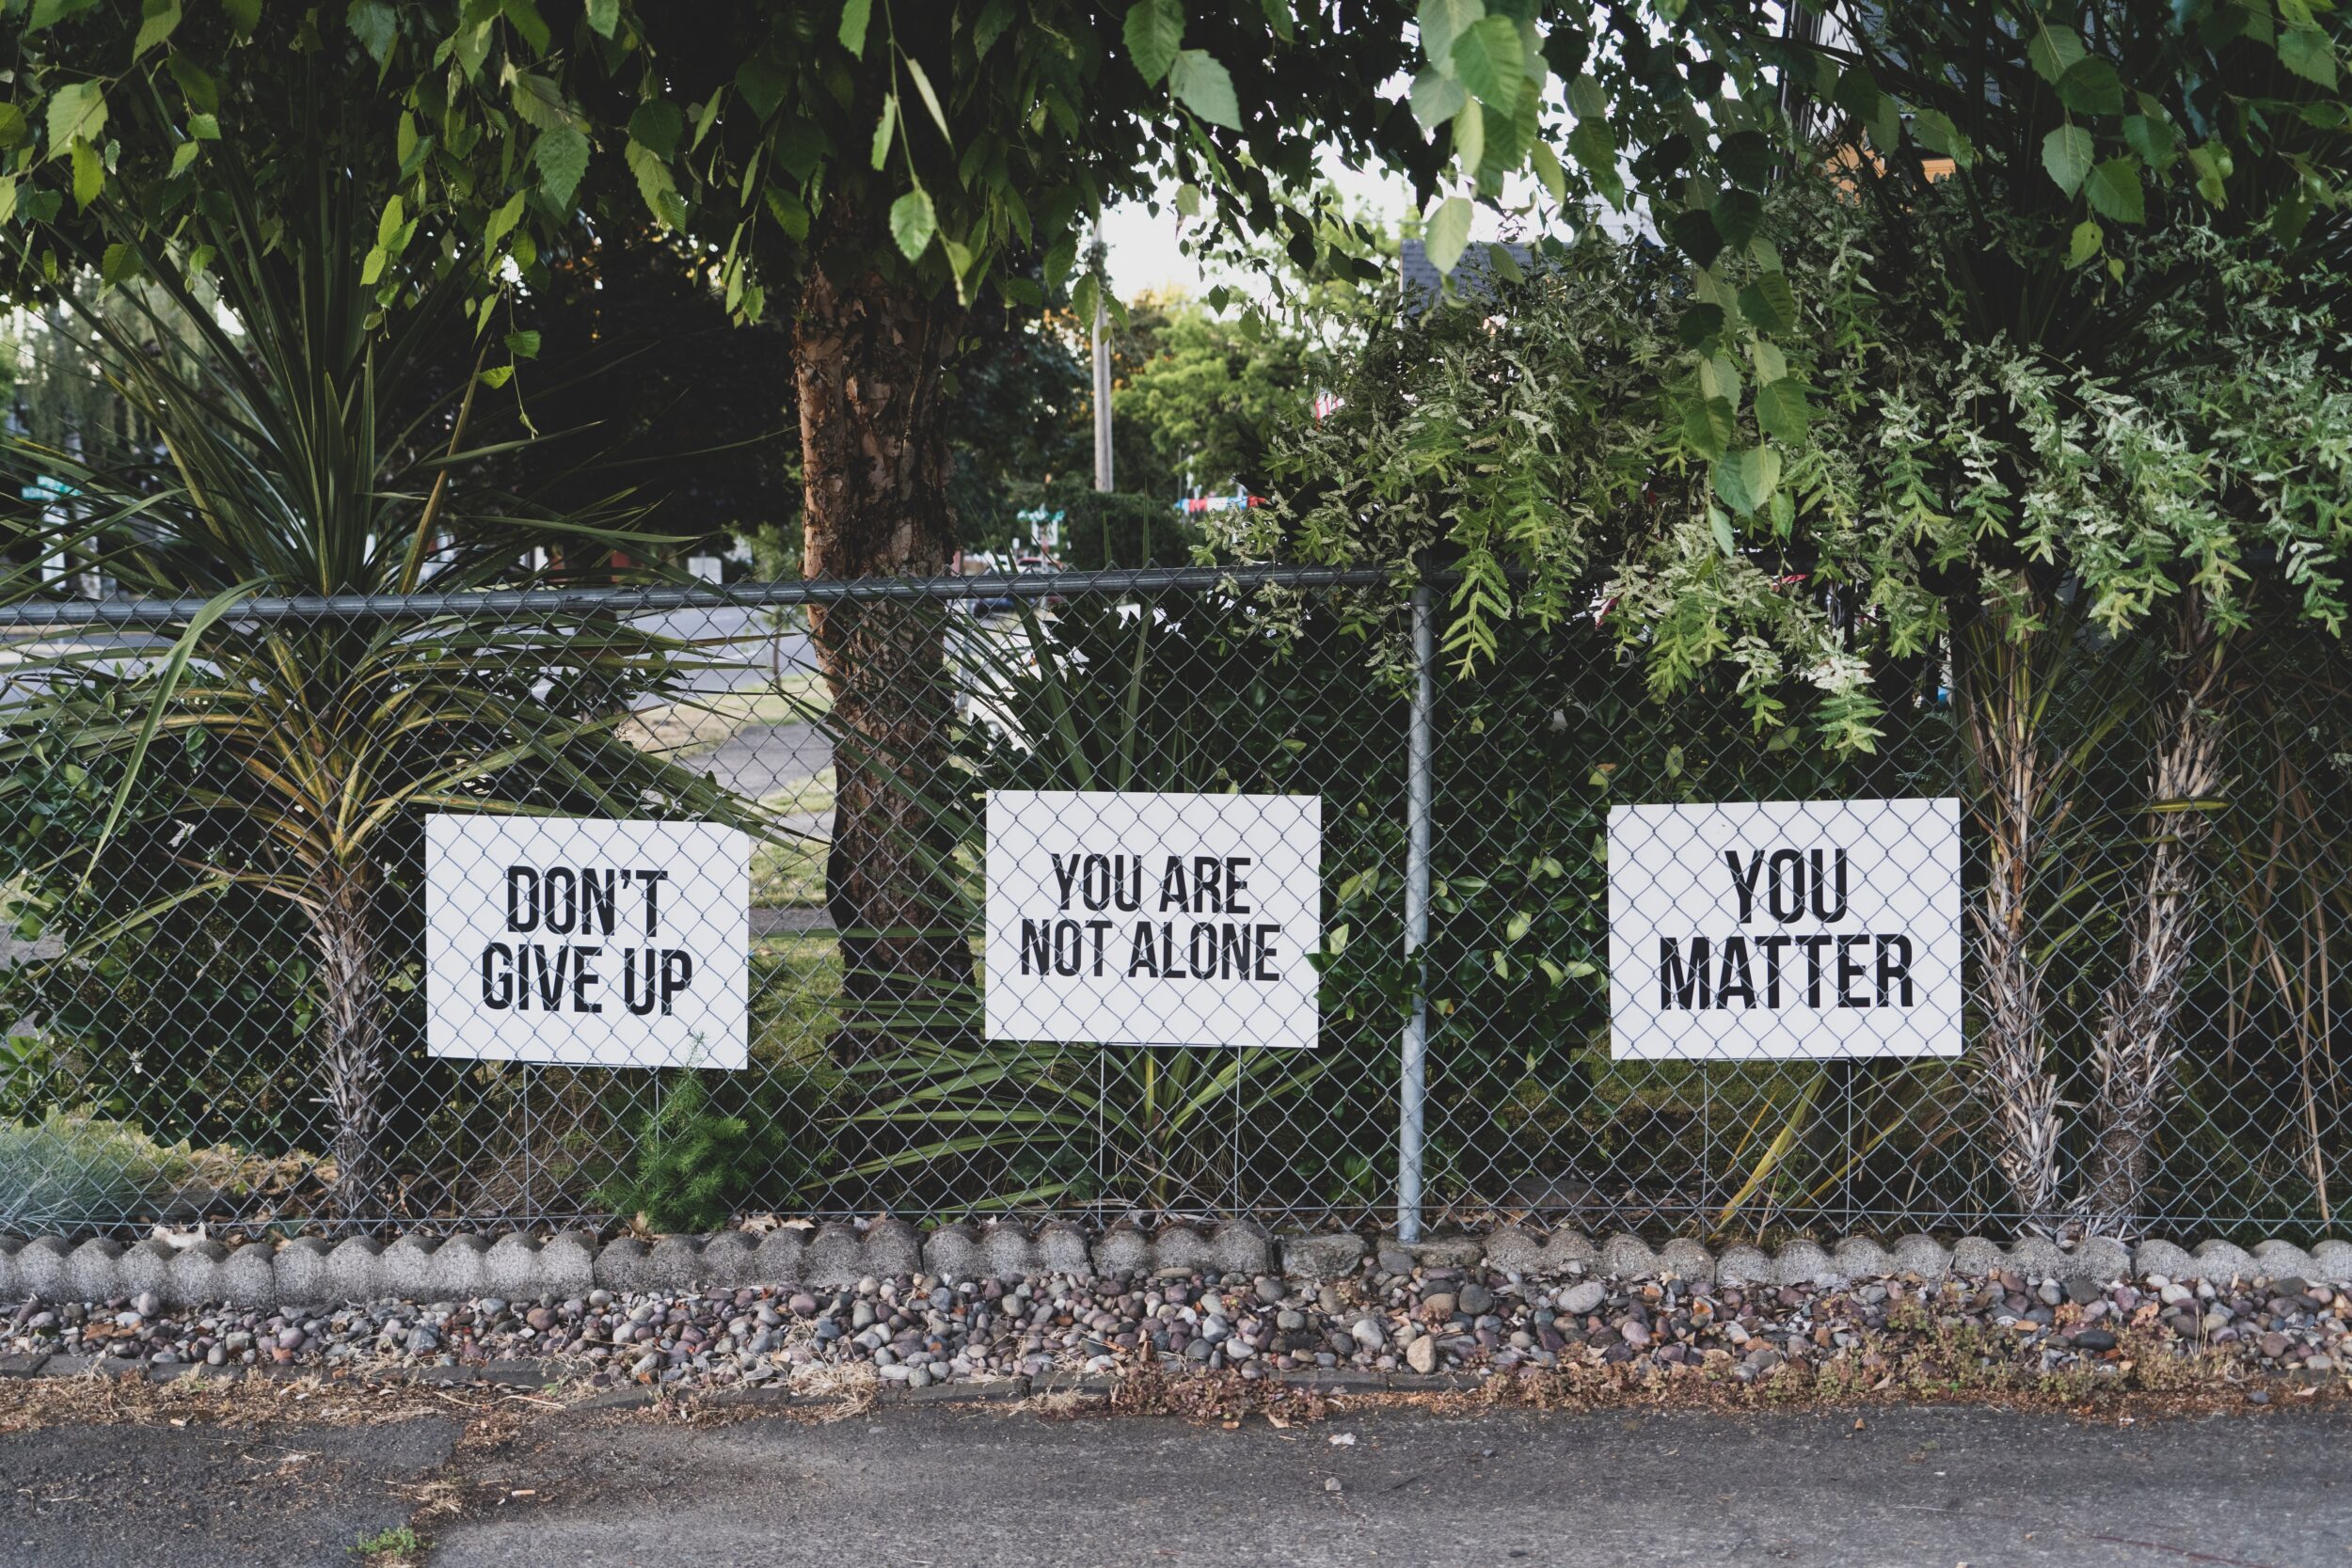 Image of a fence with signs saying "don't give up, you are not alone, you matter"